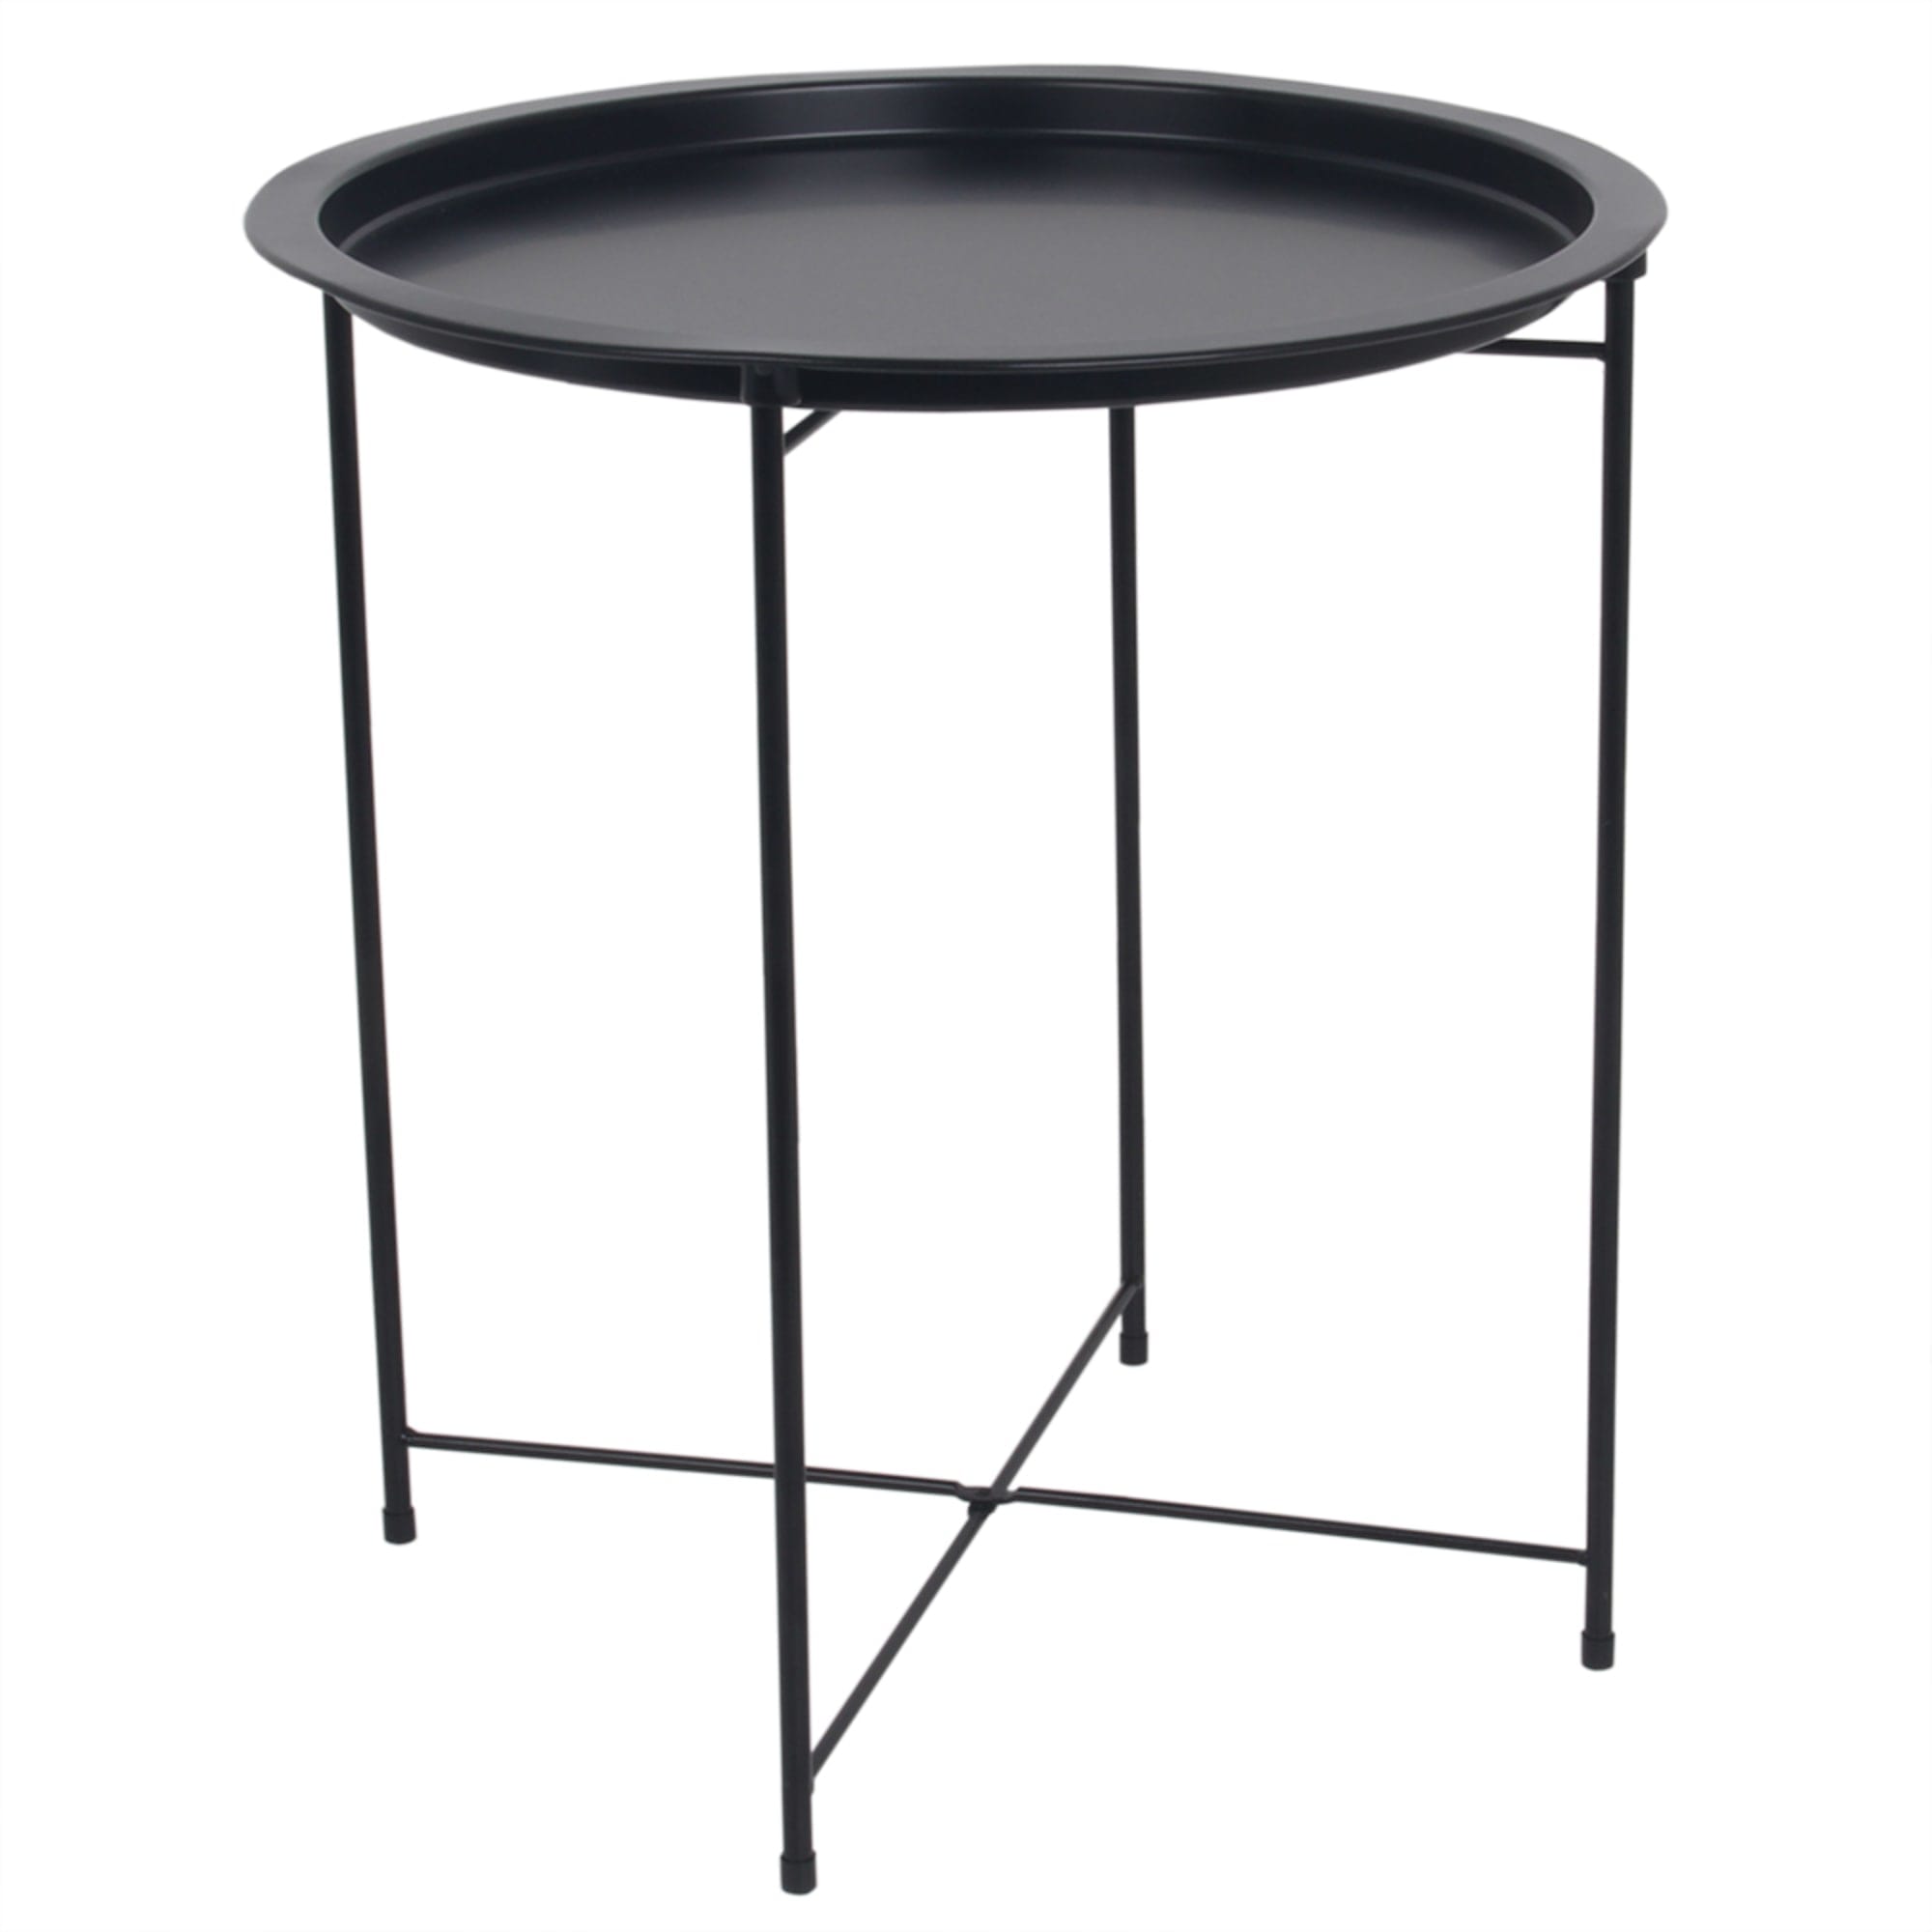 Home Basics Foldable Round Multi-Purpose Side Accent Metal Table, Matte Black $15.00 EACH, CASE PACK OF 6